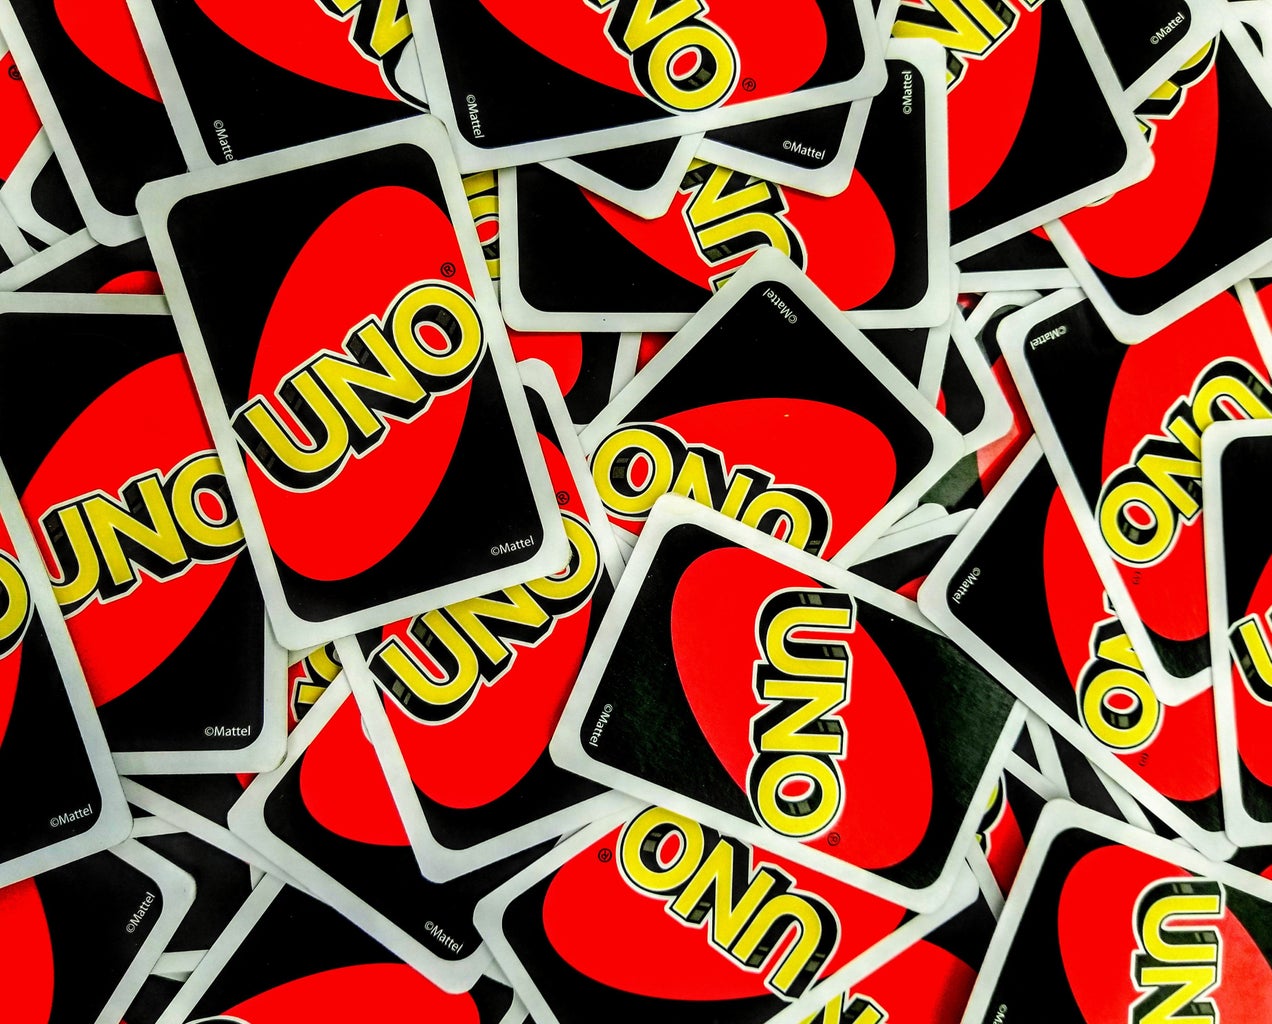 Uno cards spread out everywhere